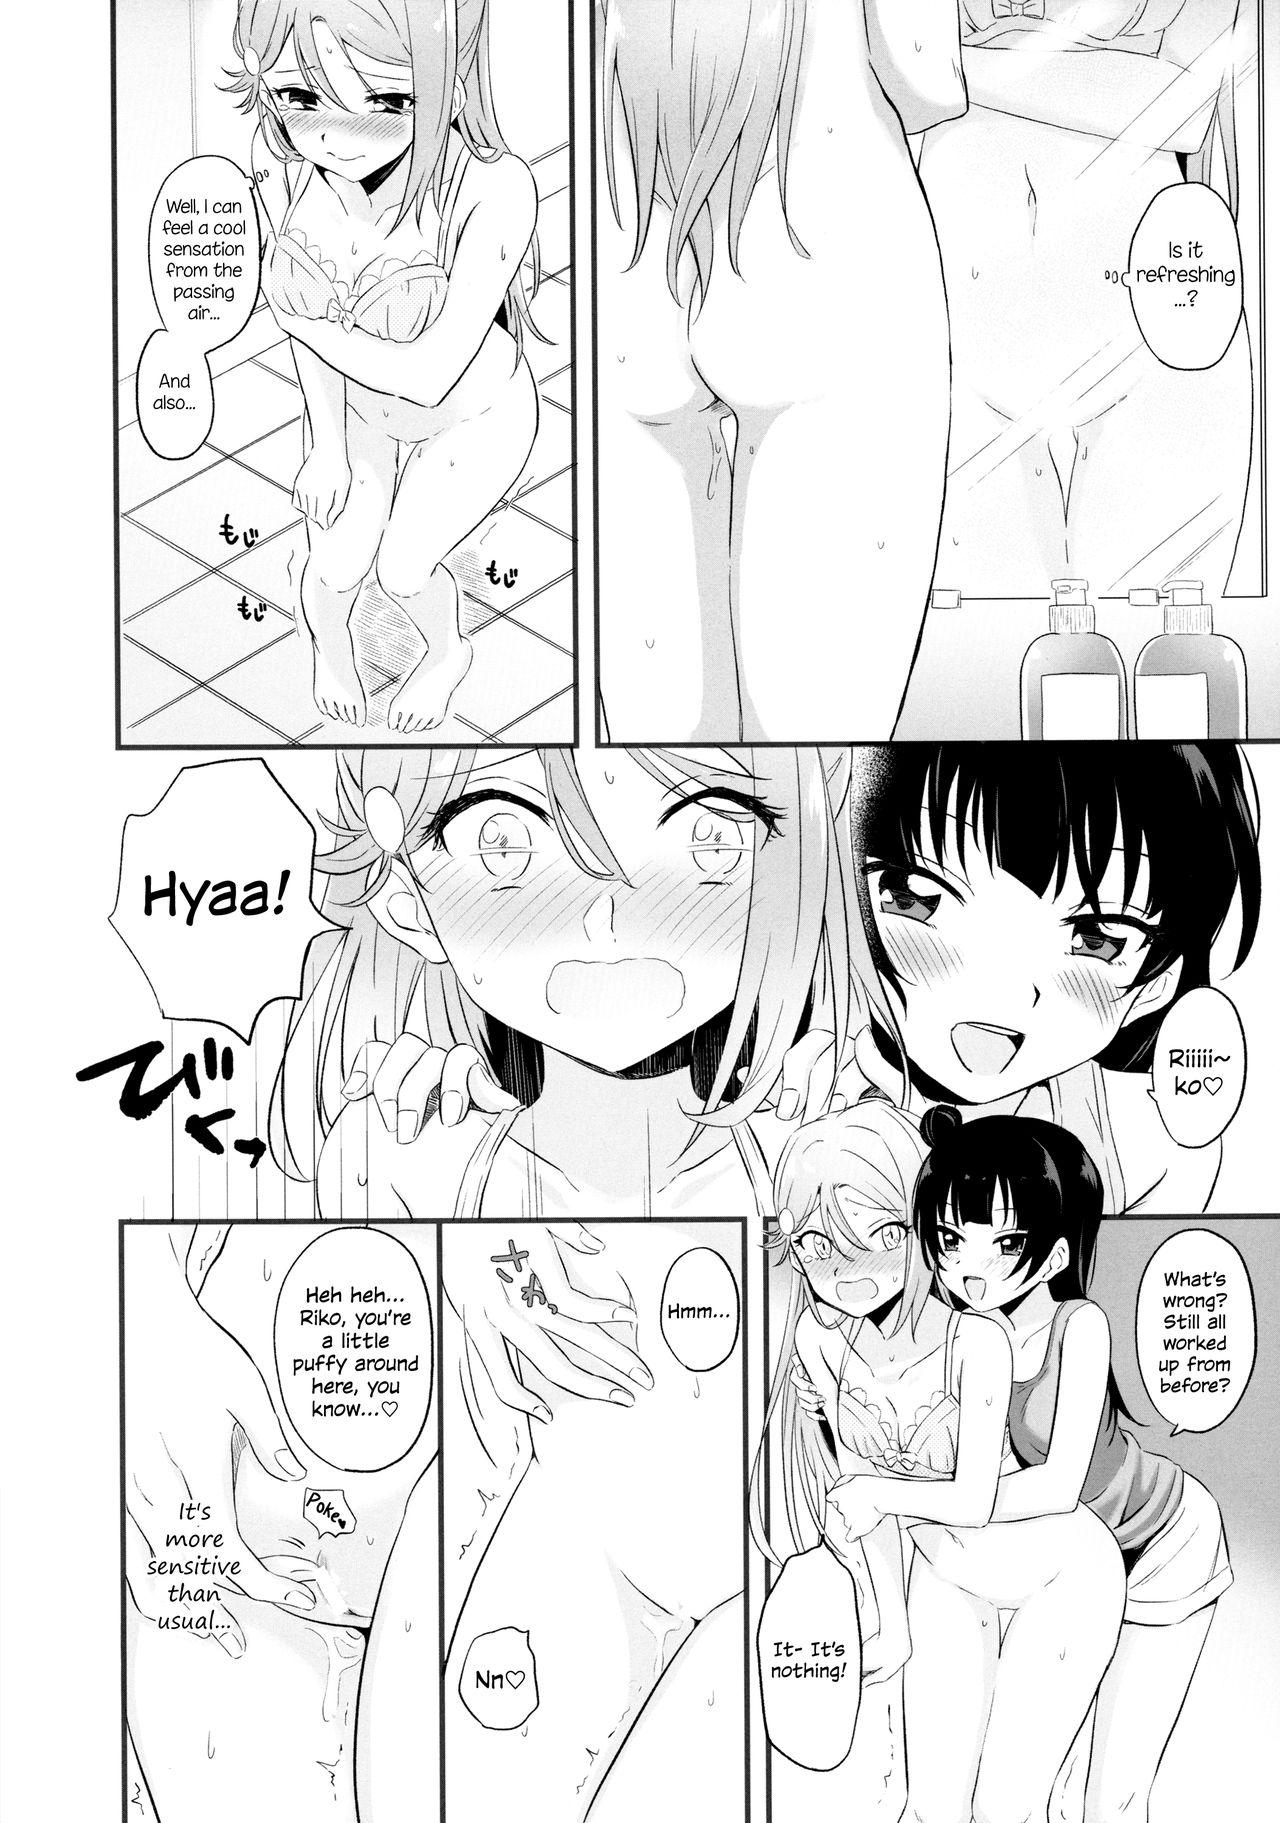 And Bitter Sweet Syndrome - Love live sunshine Cbt - Page 25